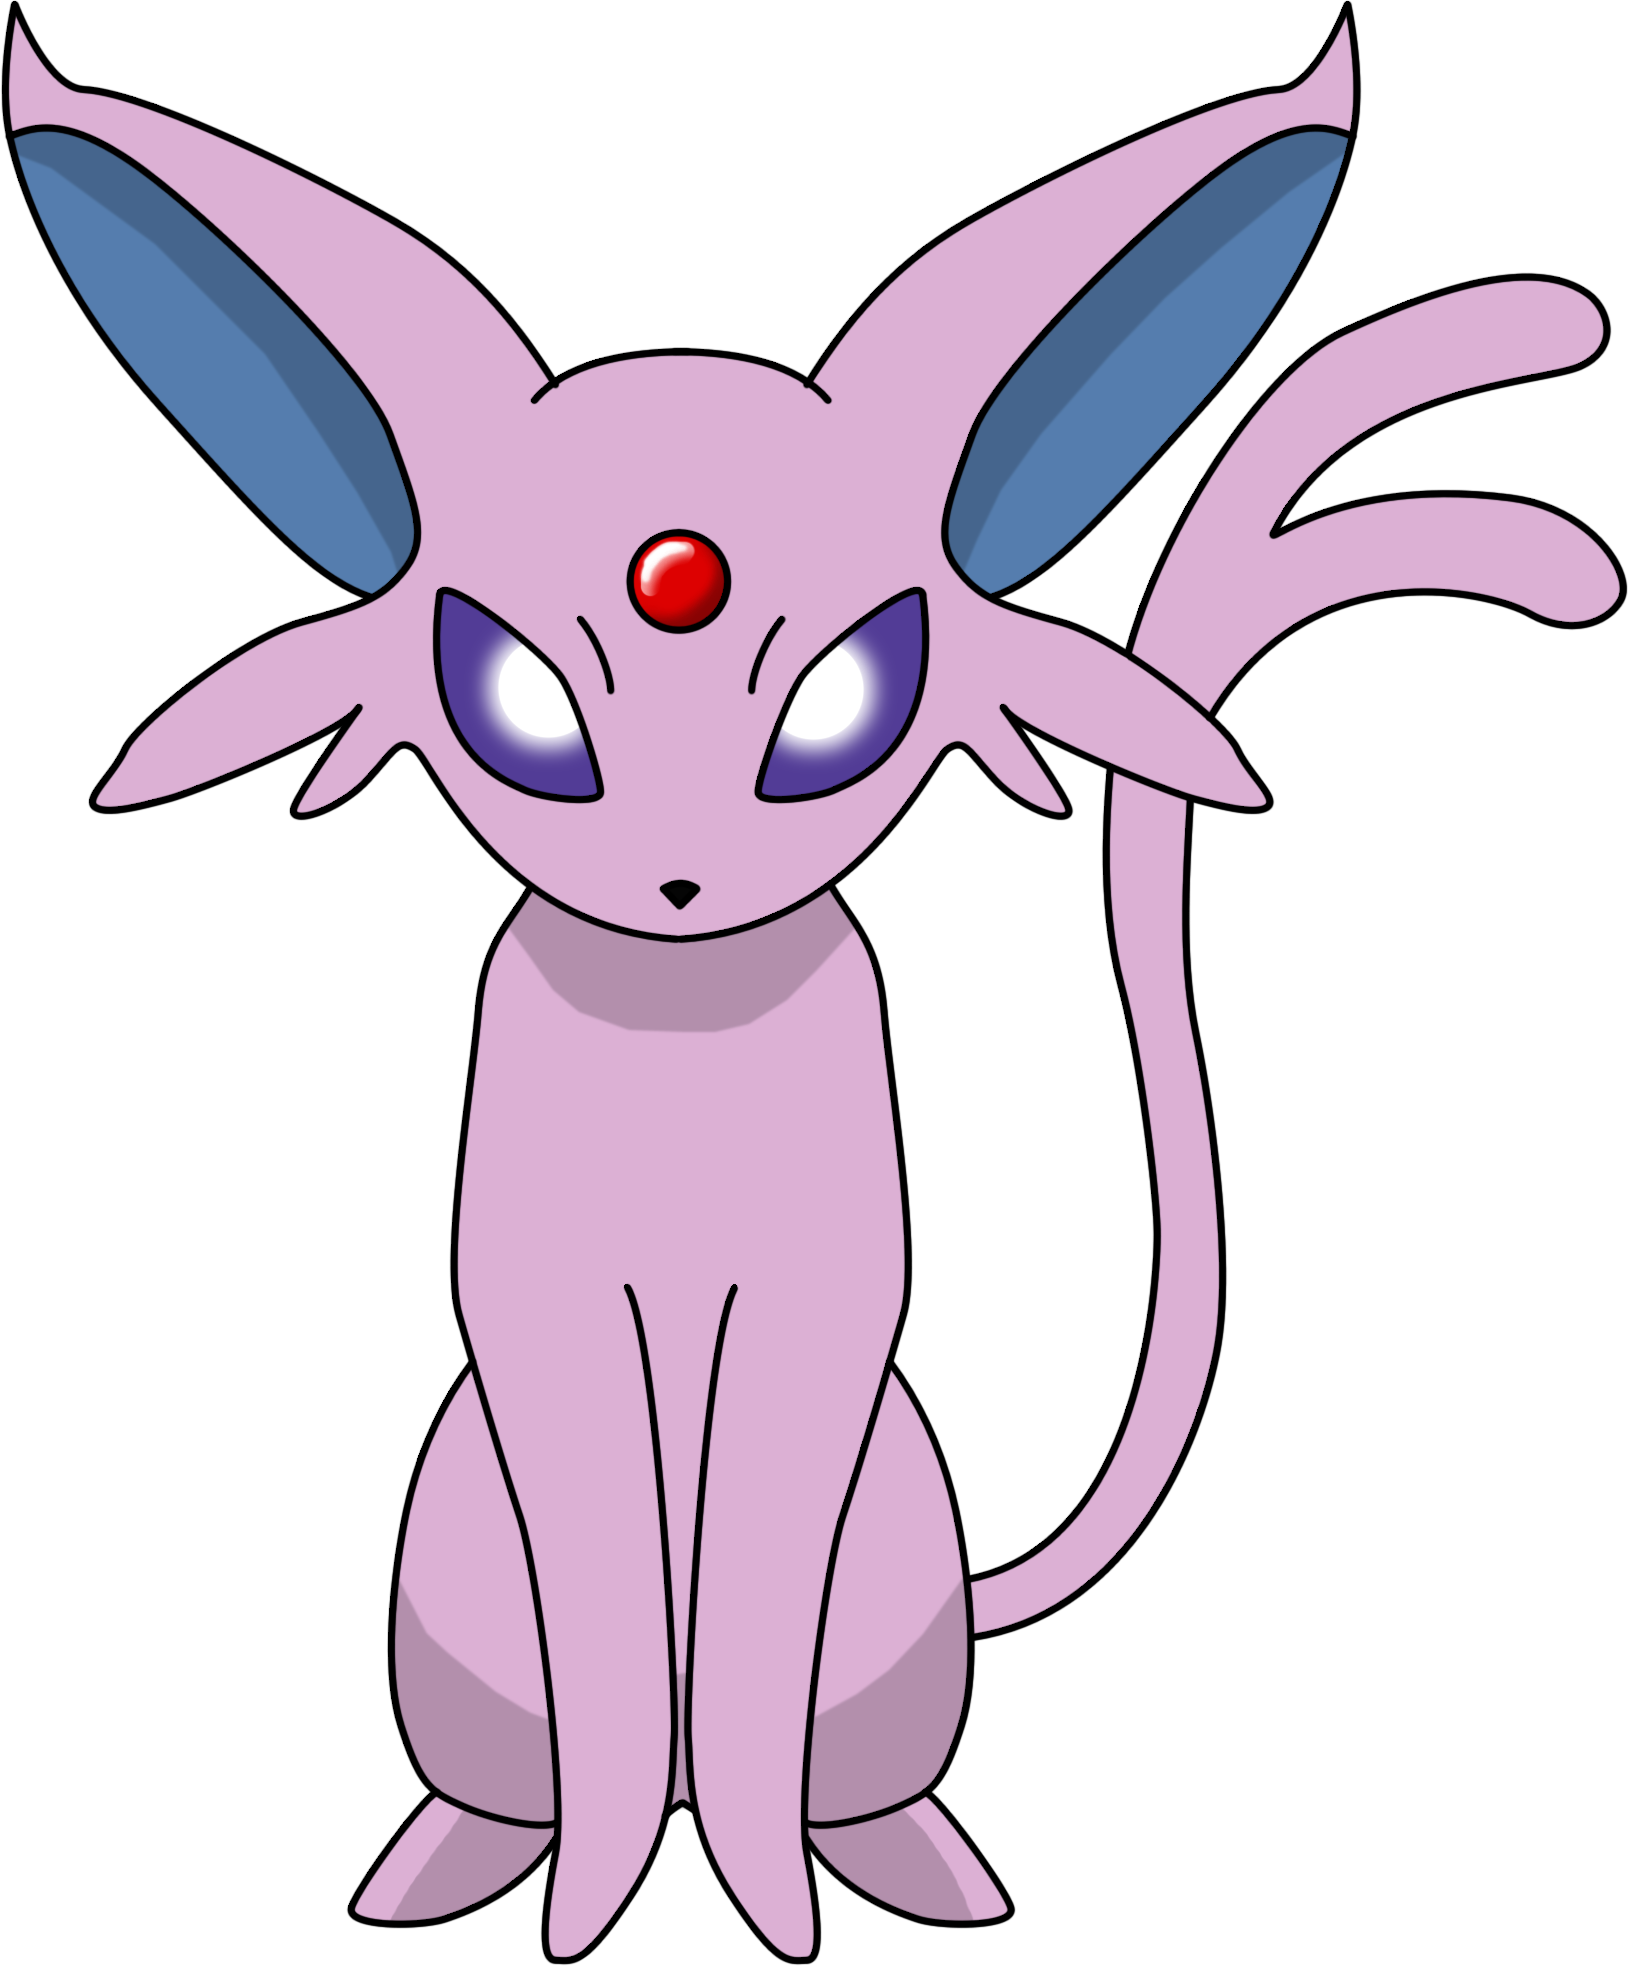 Espeon trainer pokemon none. Legs clipart outstretched arm